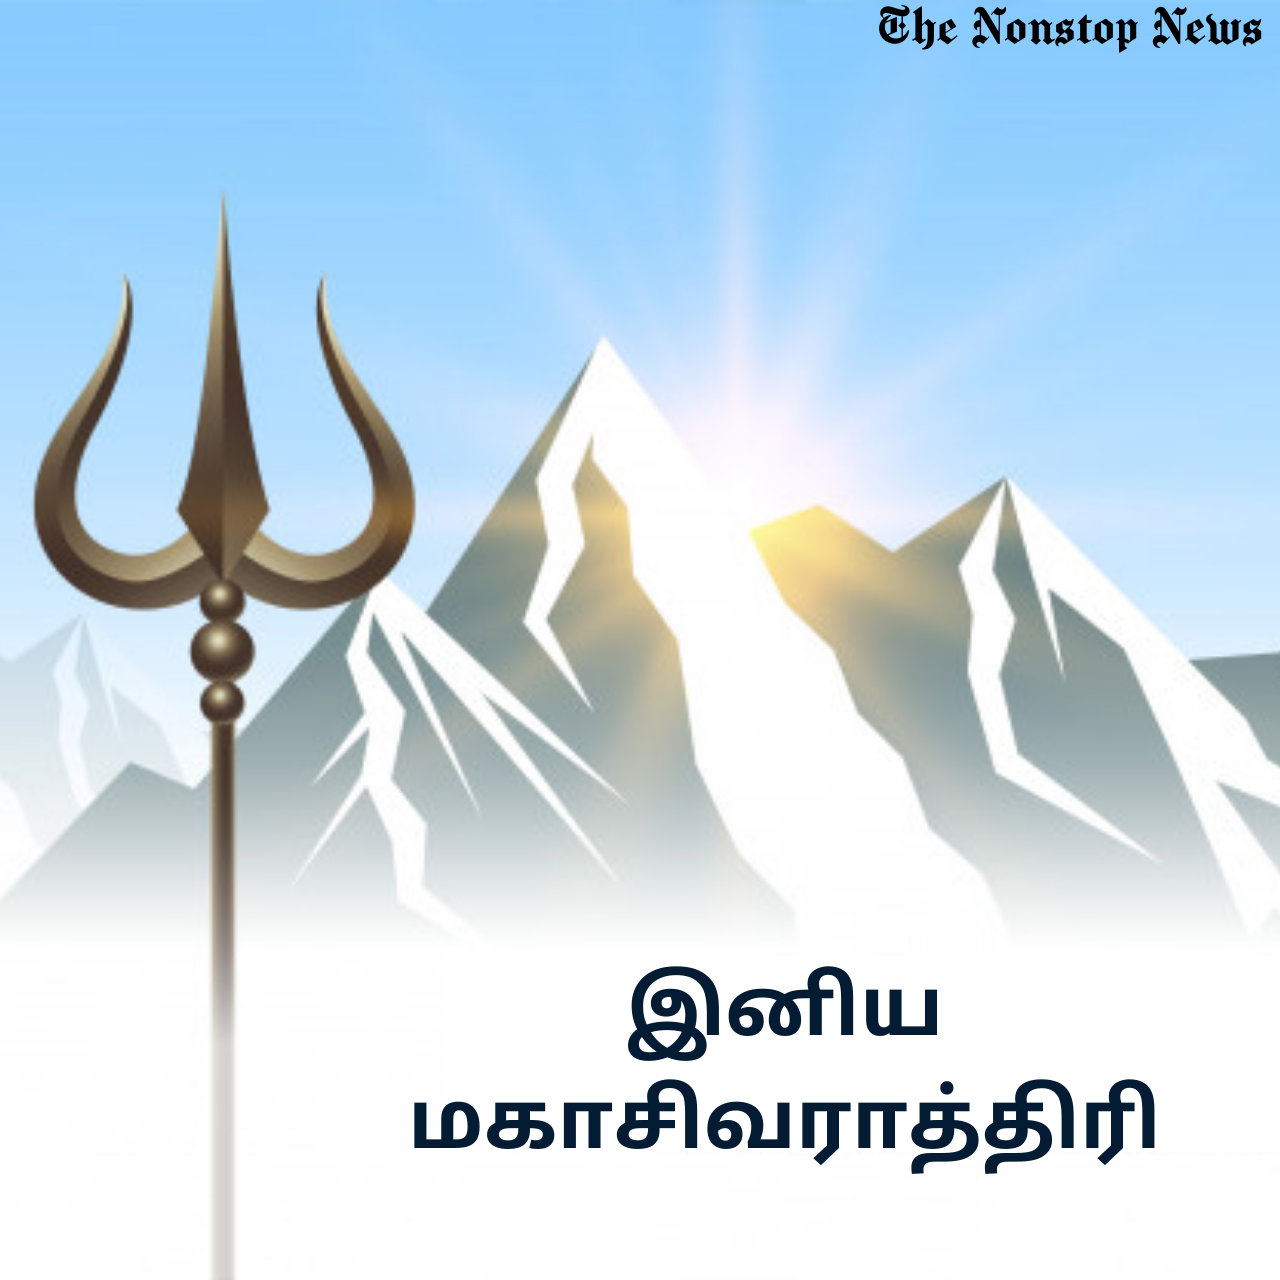 Happy Maha Shivratri 2021 Wishes in Tamil Quotes, Messages, Greetings, and HD Images to Share